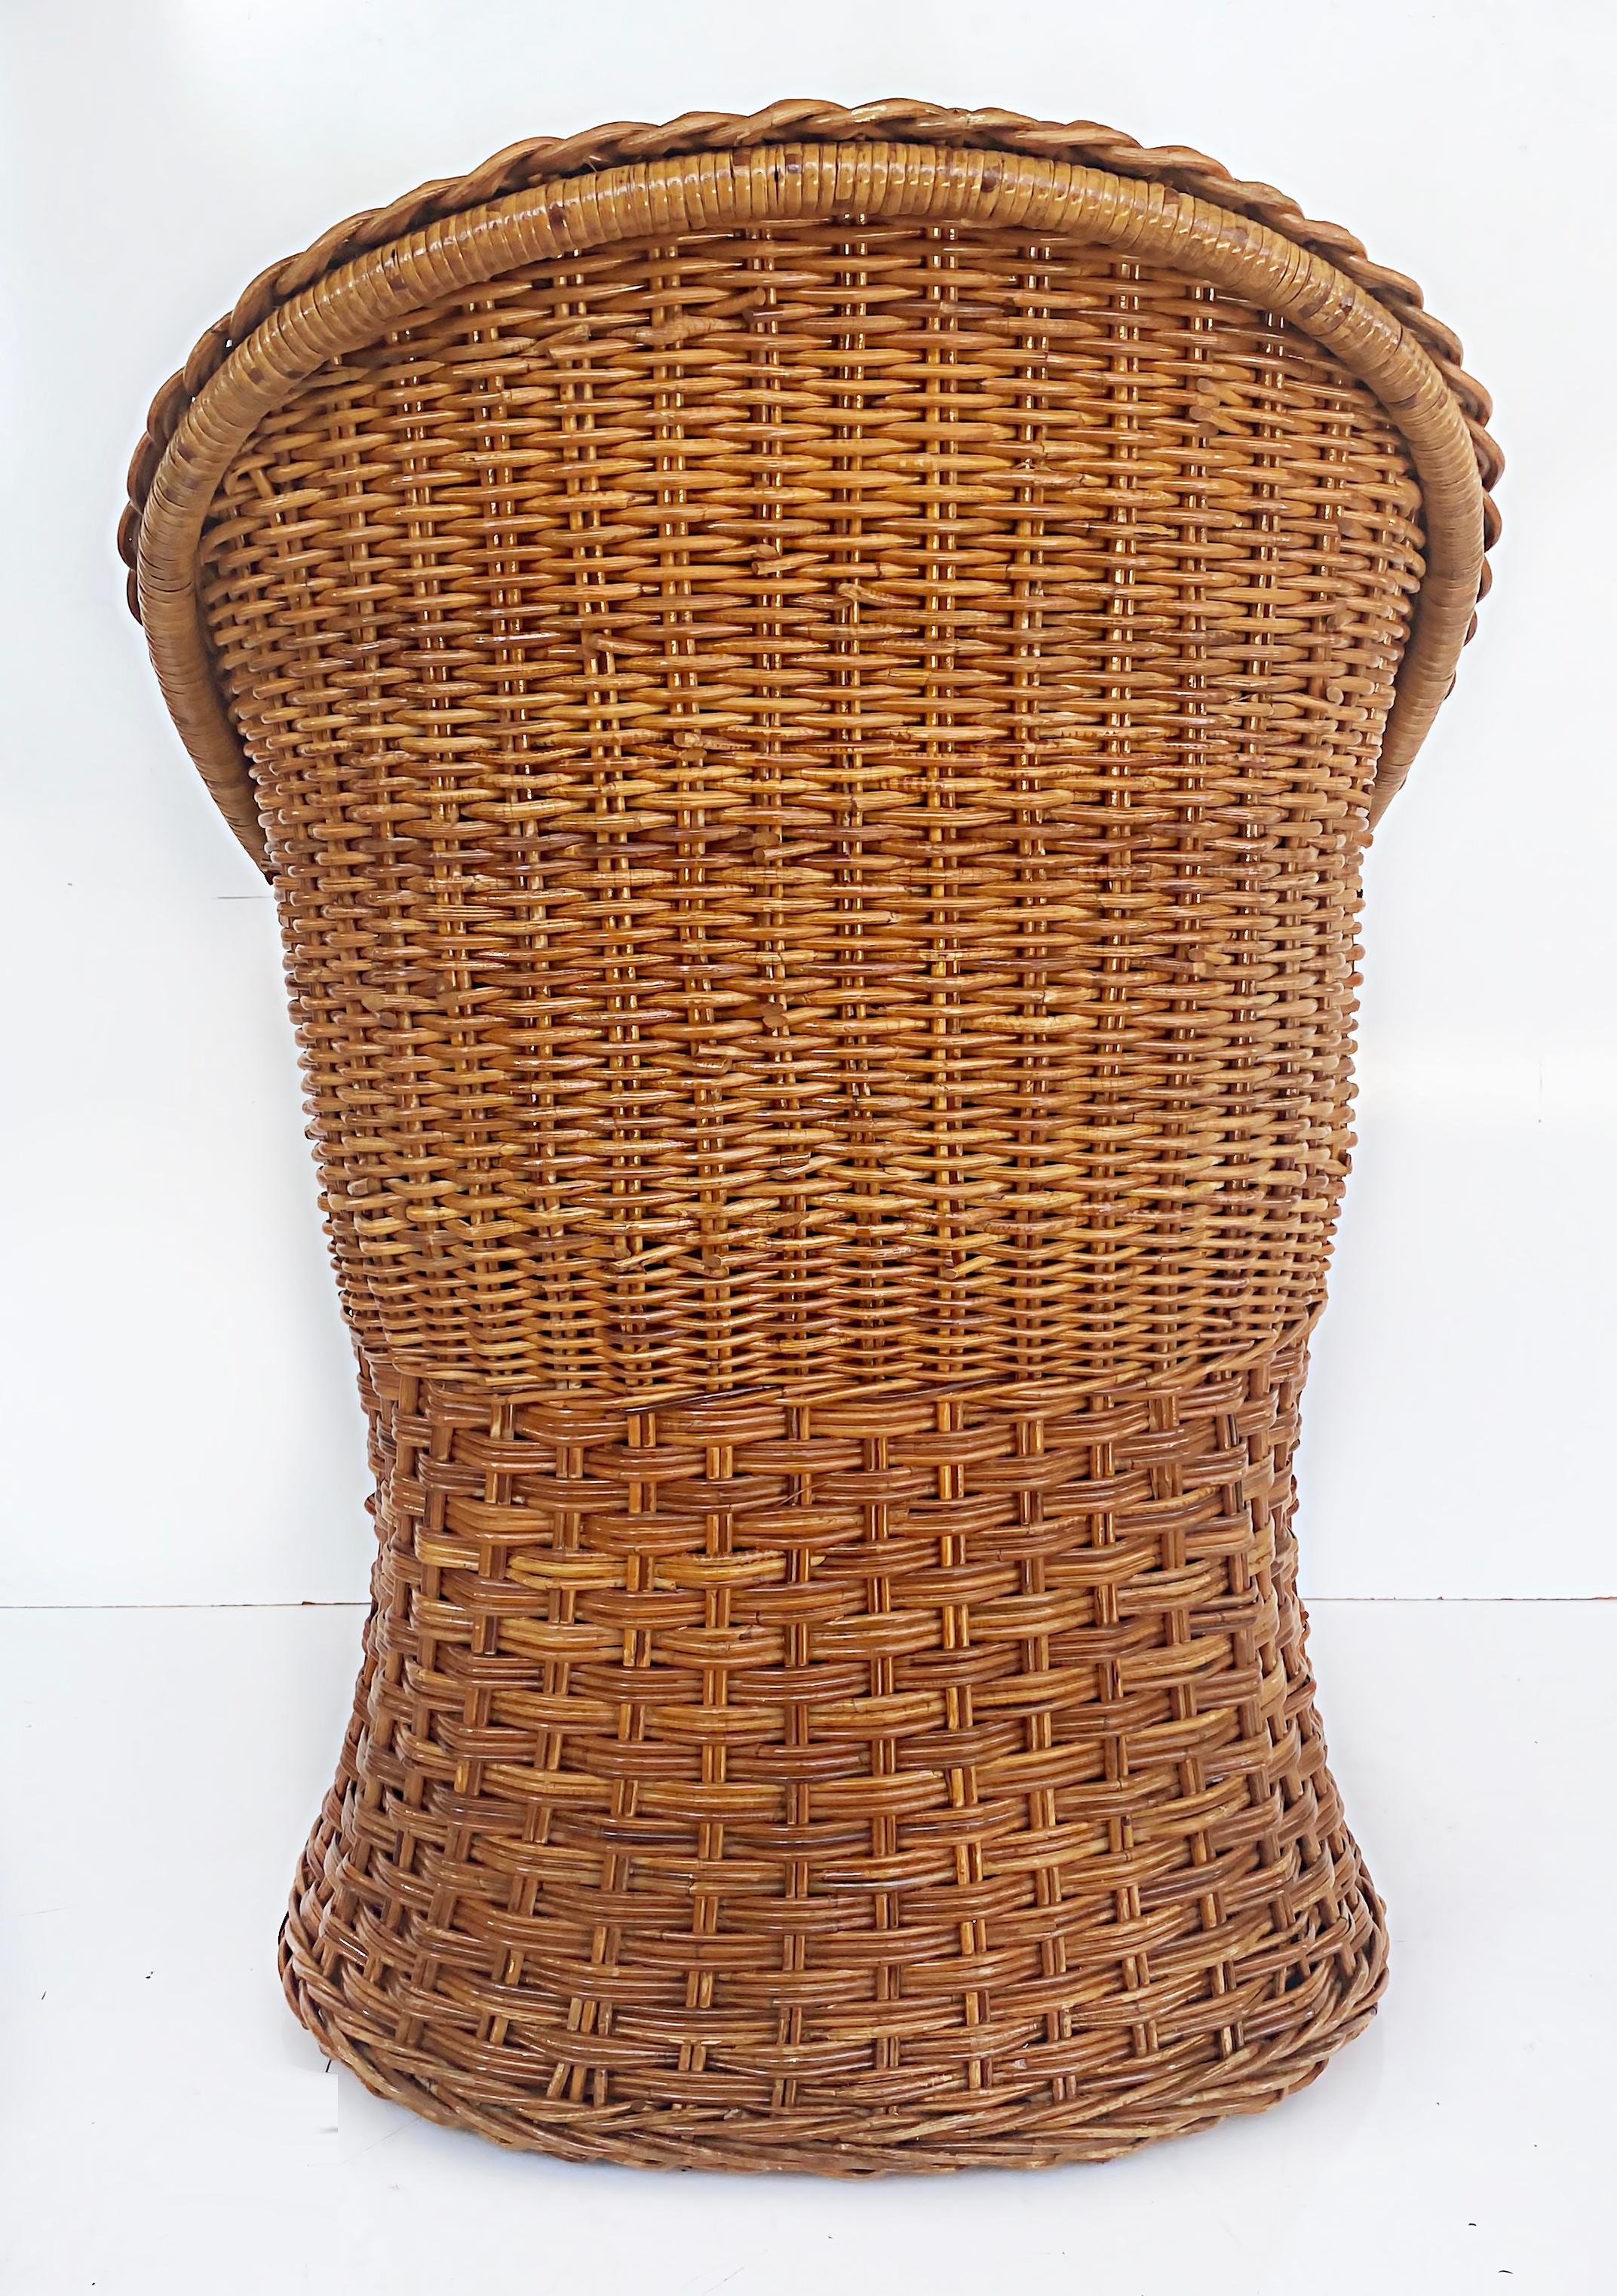 Wicker Works Braided Rattan Club Chairs, New Upholstery, 1 Pair Available For Sale 2